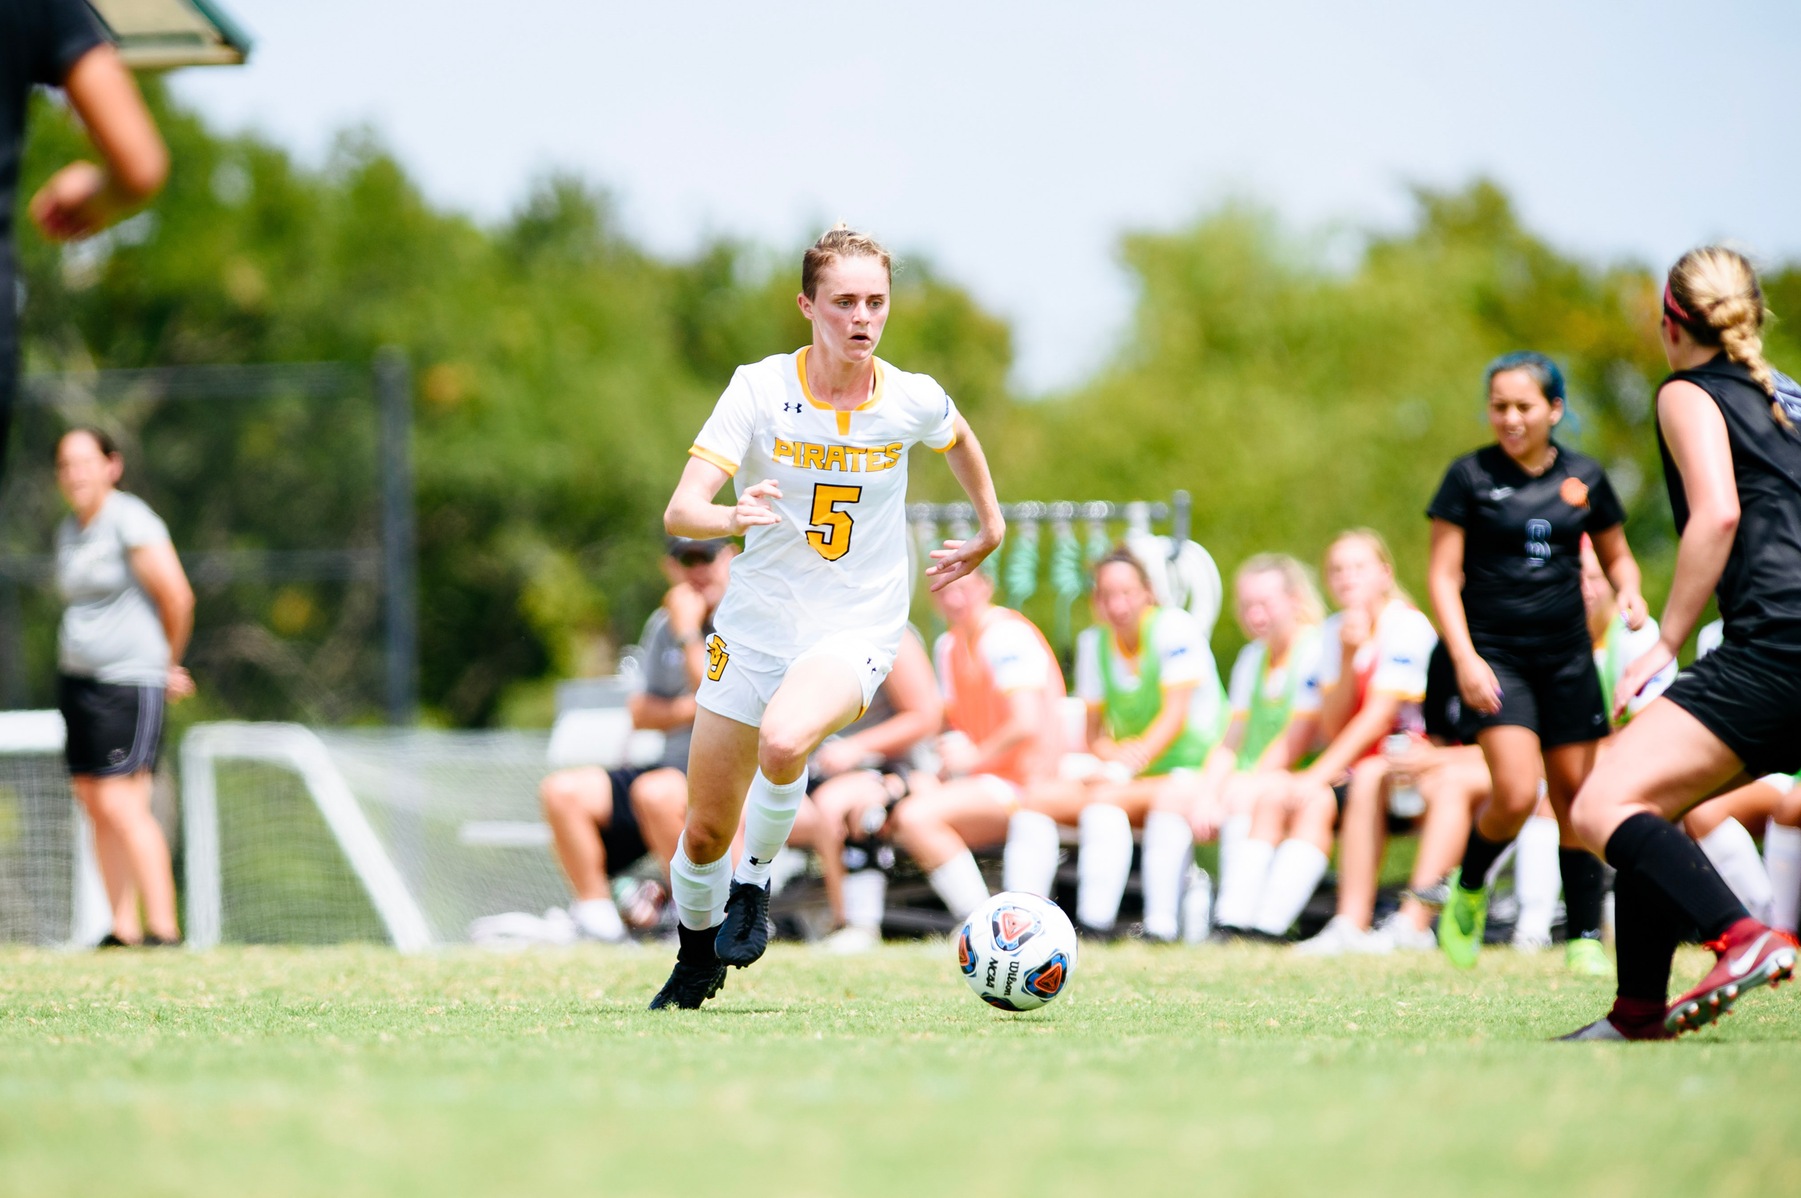 Women's Soccer Earns 7th Shut Out Victory